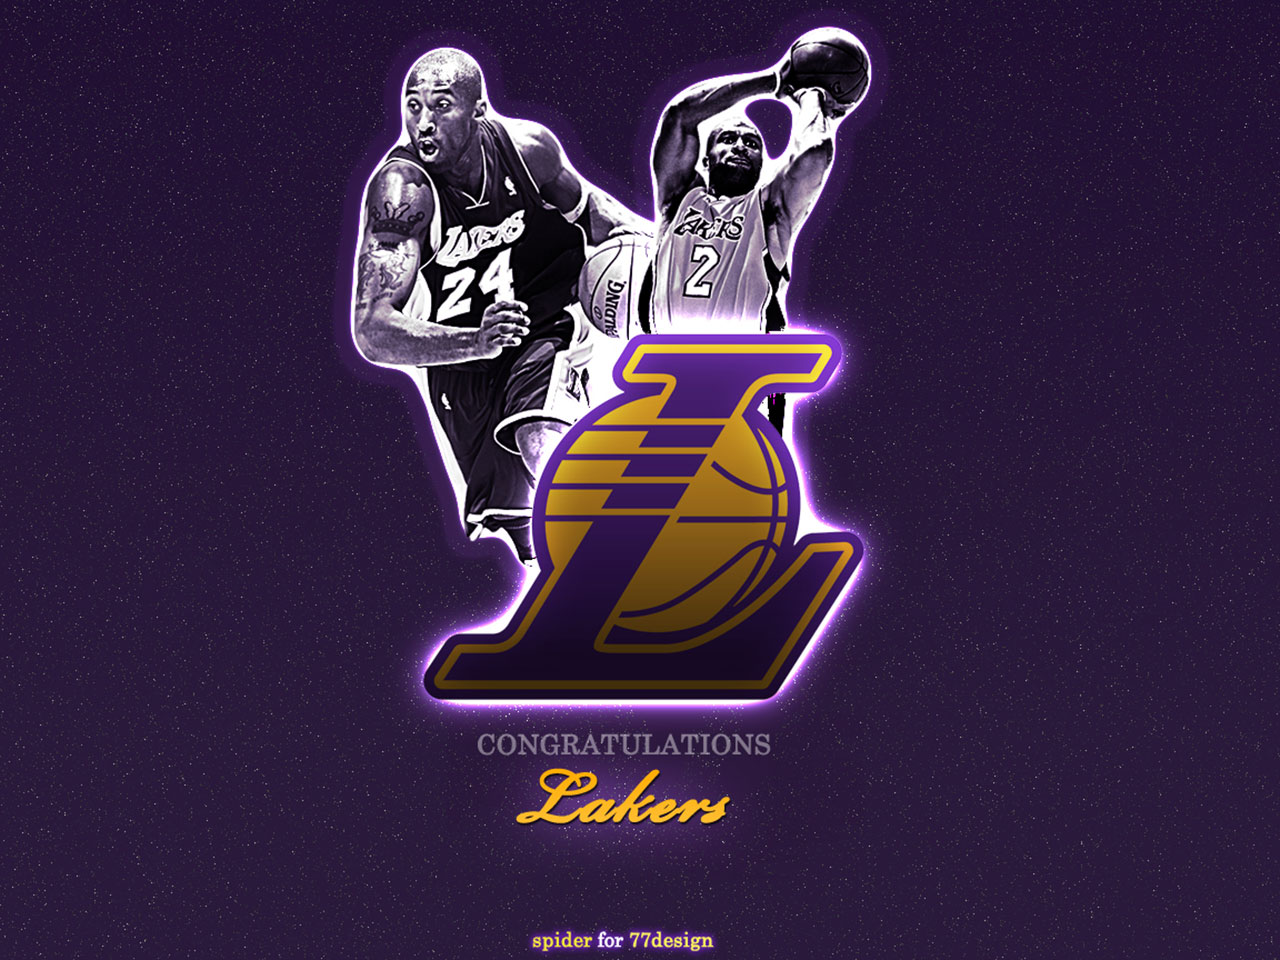 Los Angeles Lakers Wallpaper Background